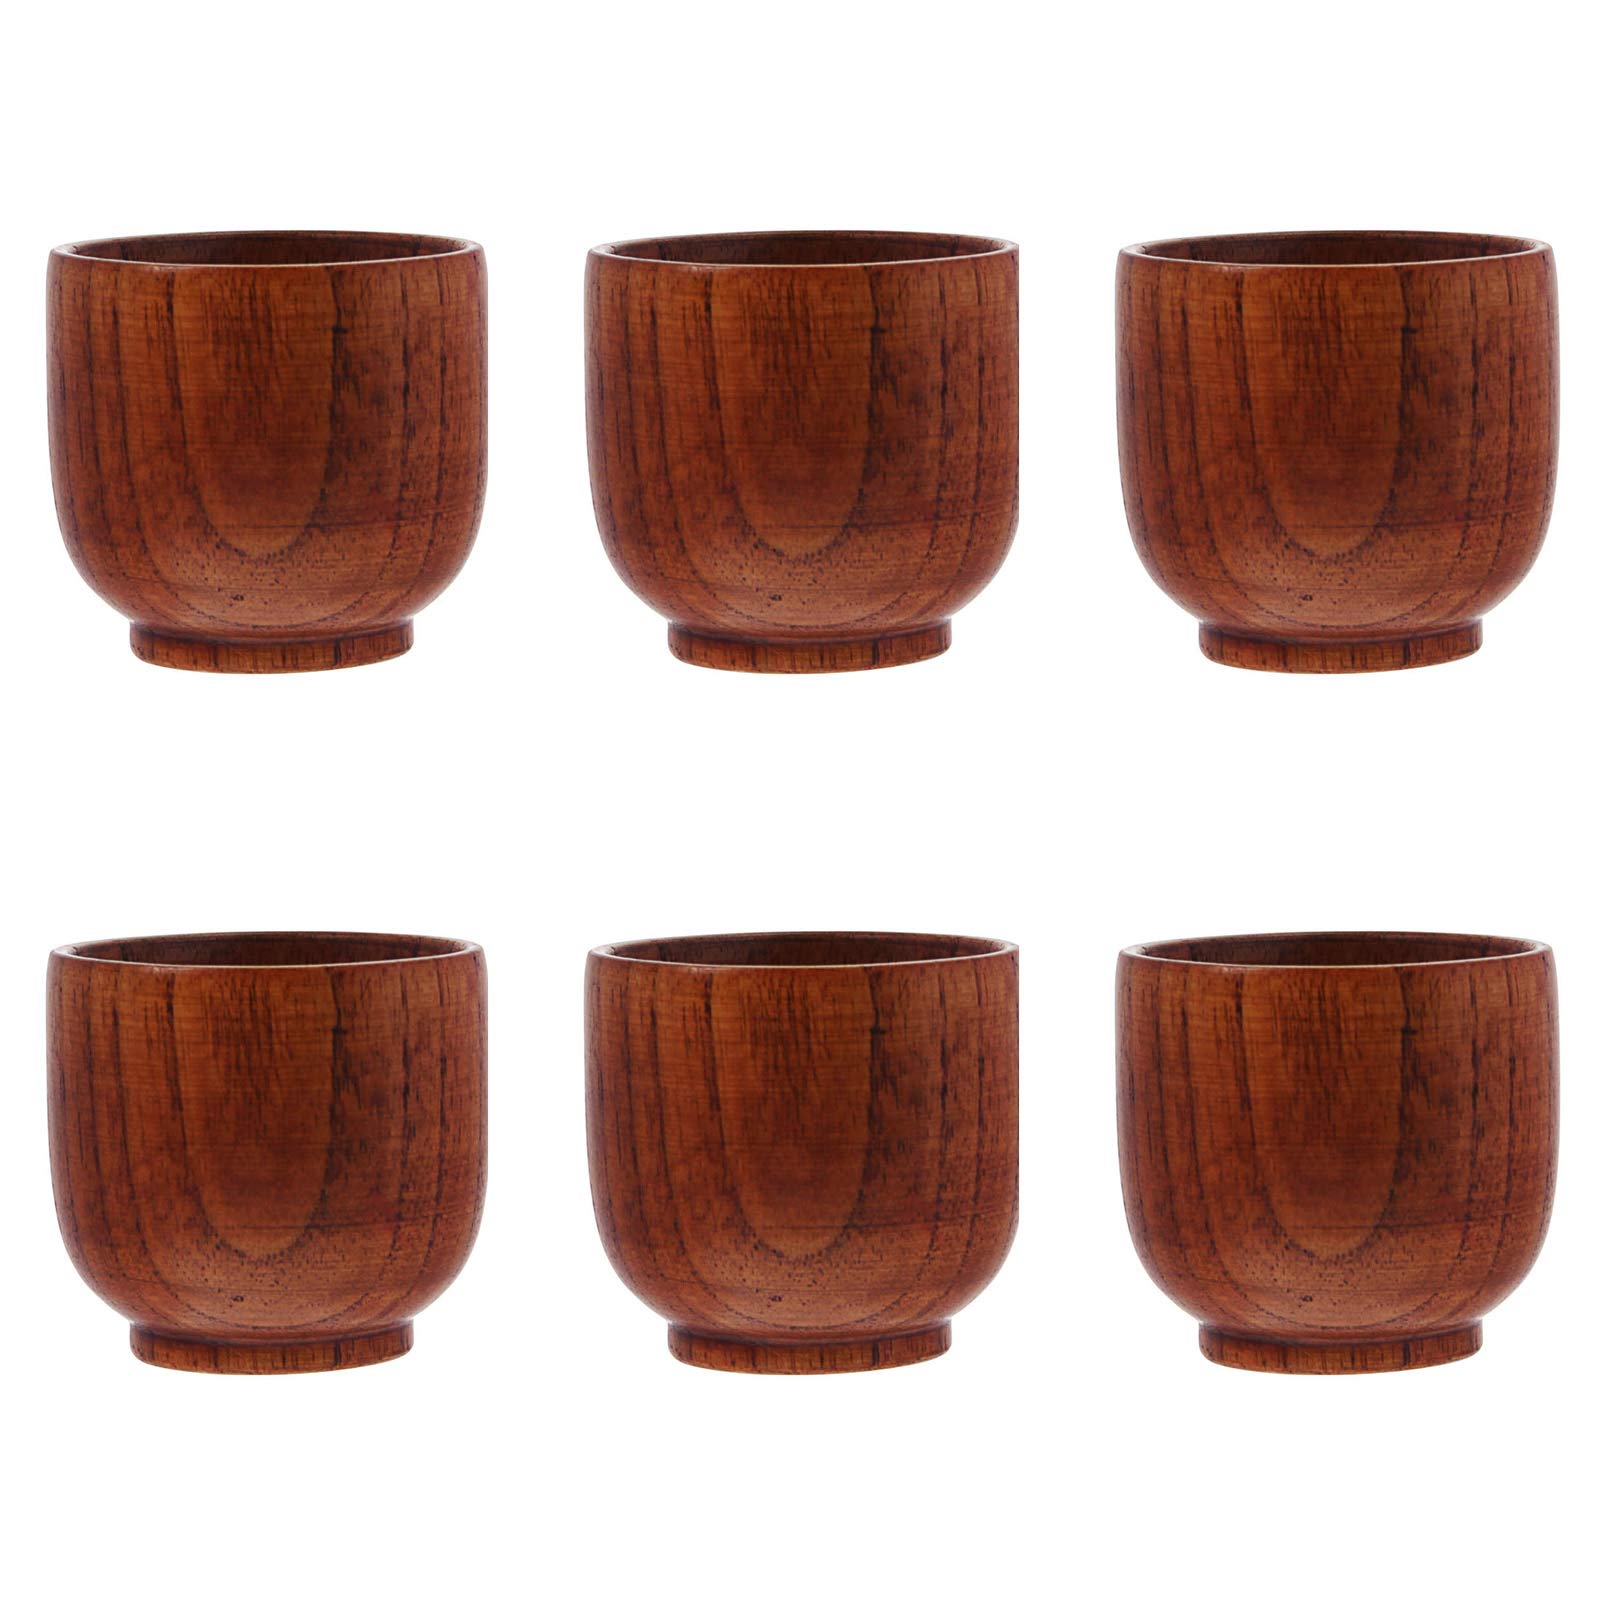 QWDLID 6 Pieces Japanese Style Wooden Cup Jujube Wood Tea Cup Wooden Coffee Cup Water Mug Drinking Cup Wooden Cup Set for Izakaya, Restaurant, Cafe